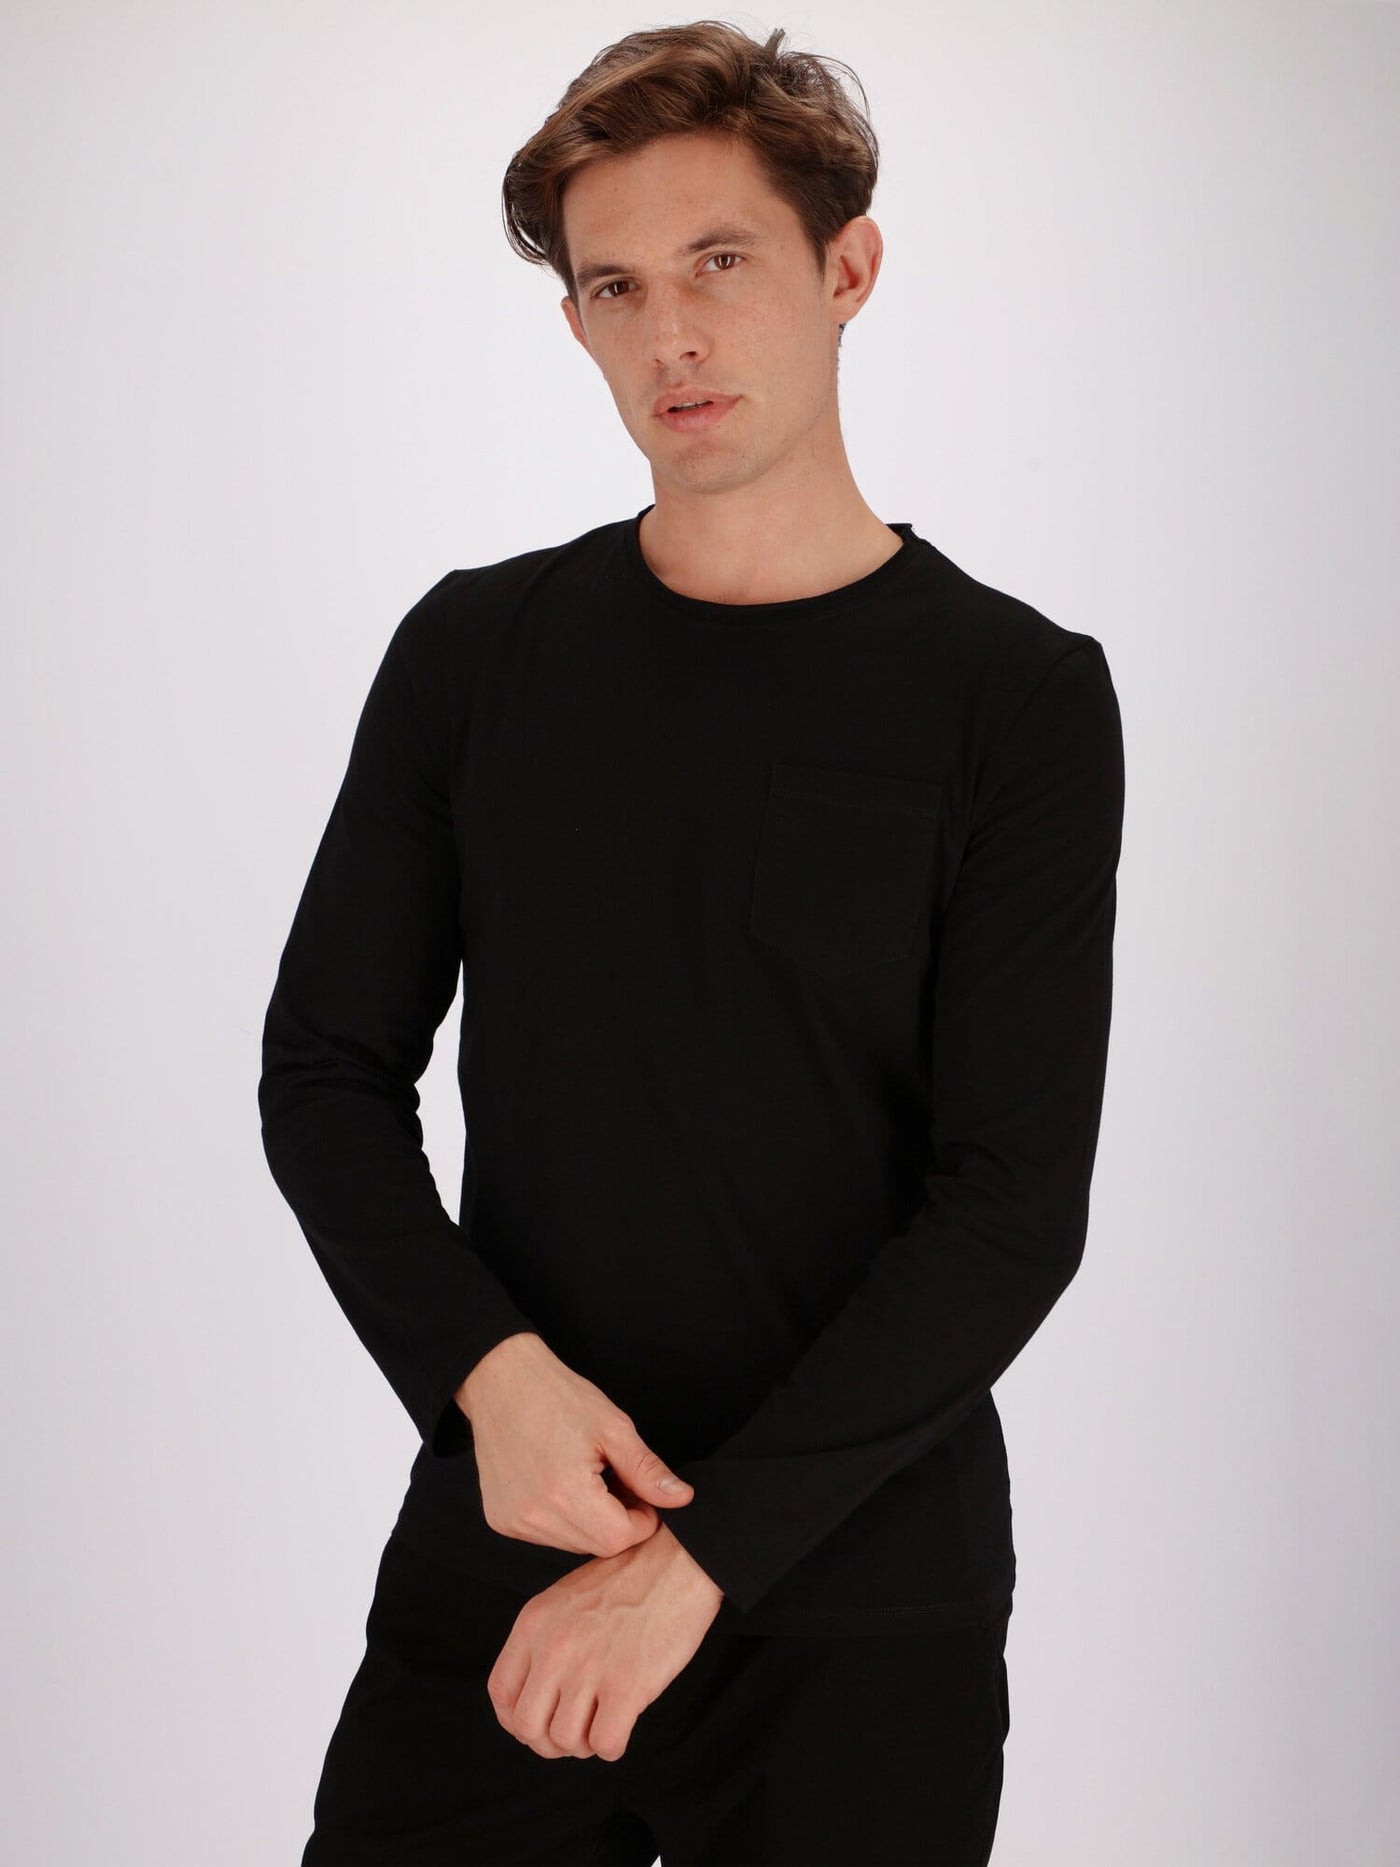 OR T-Shirts Black / S Chest Pocket Round Neck T-Shirt